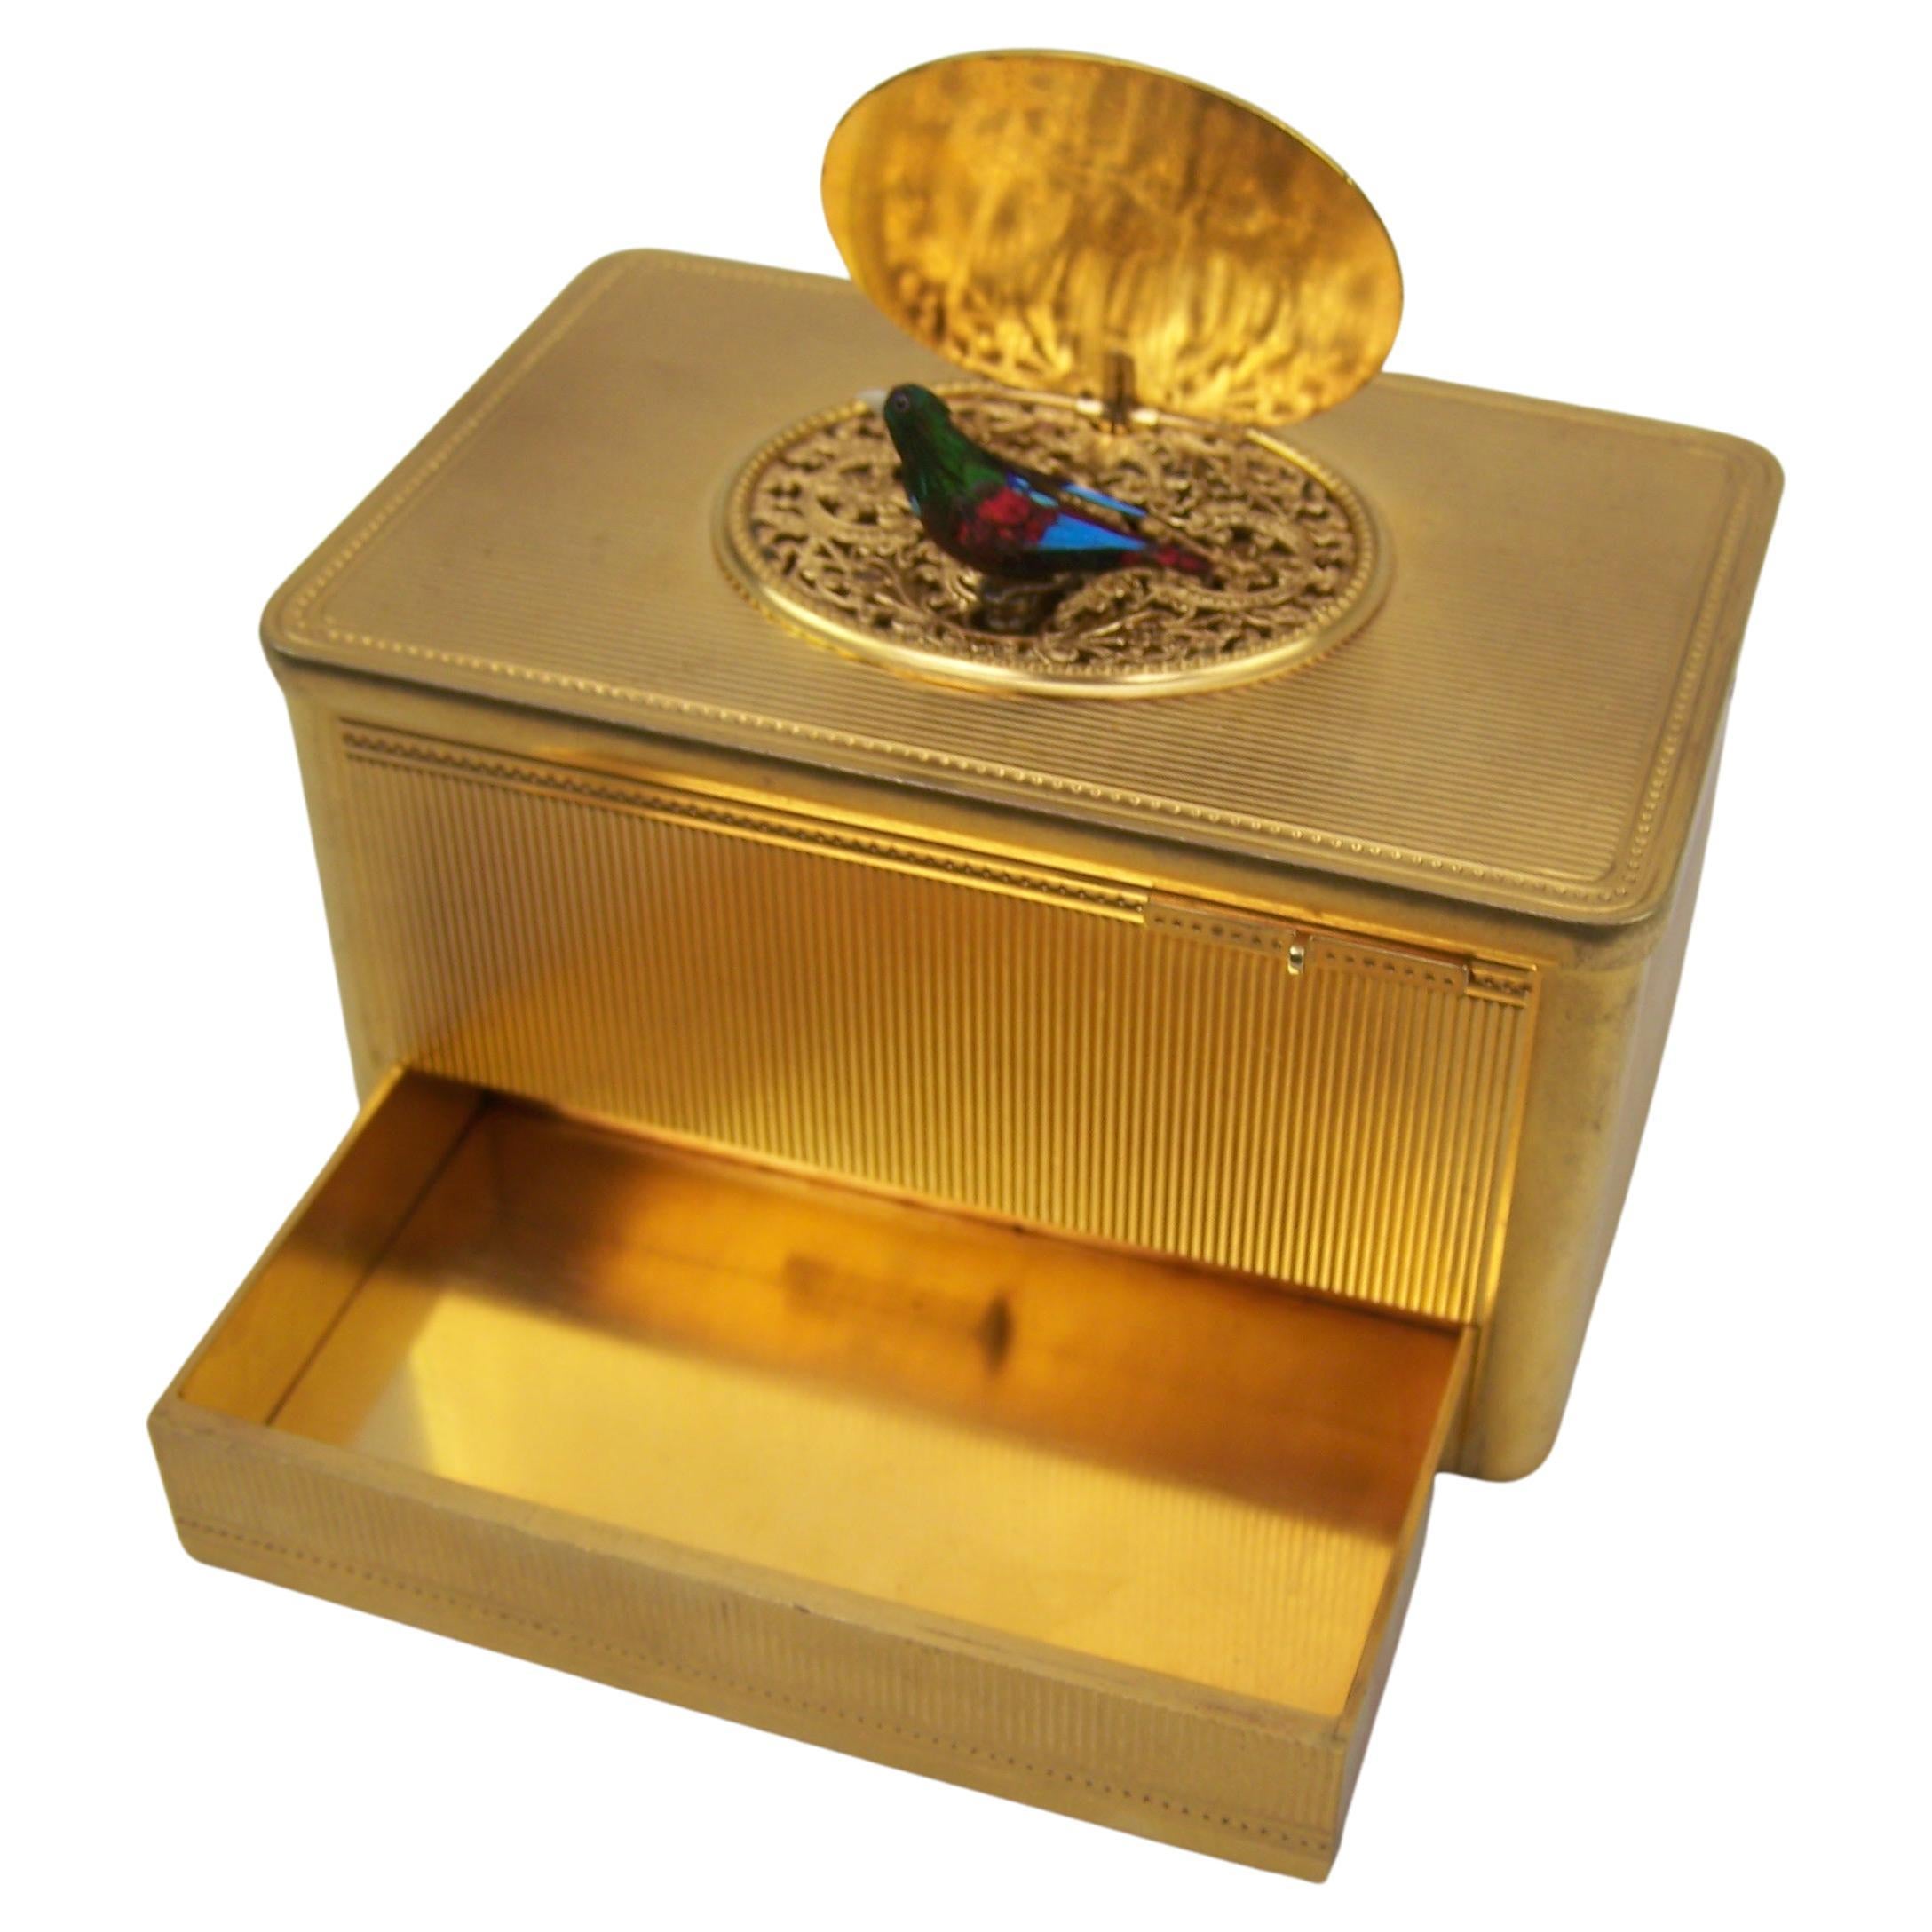 Singing Bird Box by Bontems with Automatic Drawer